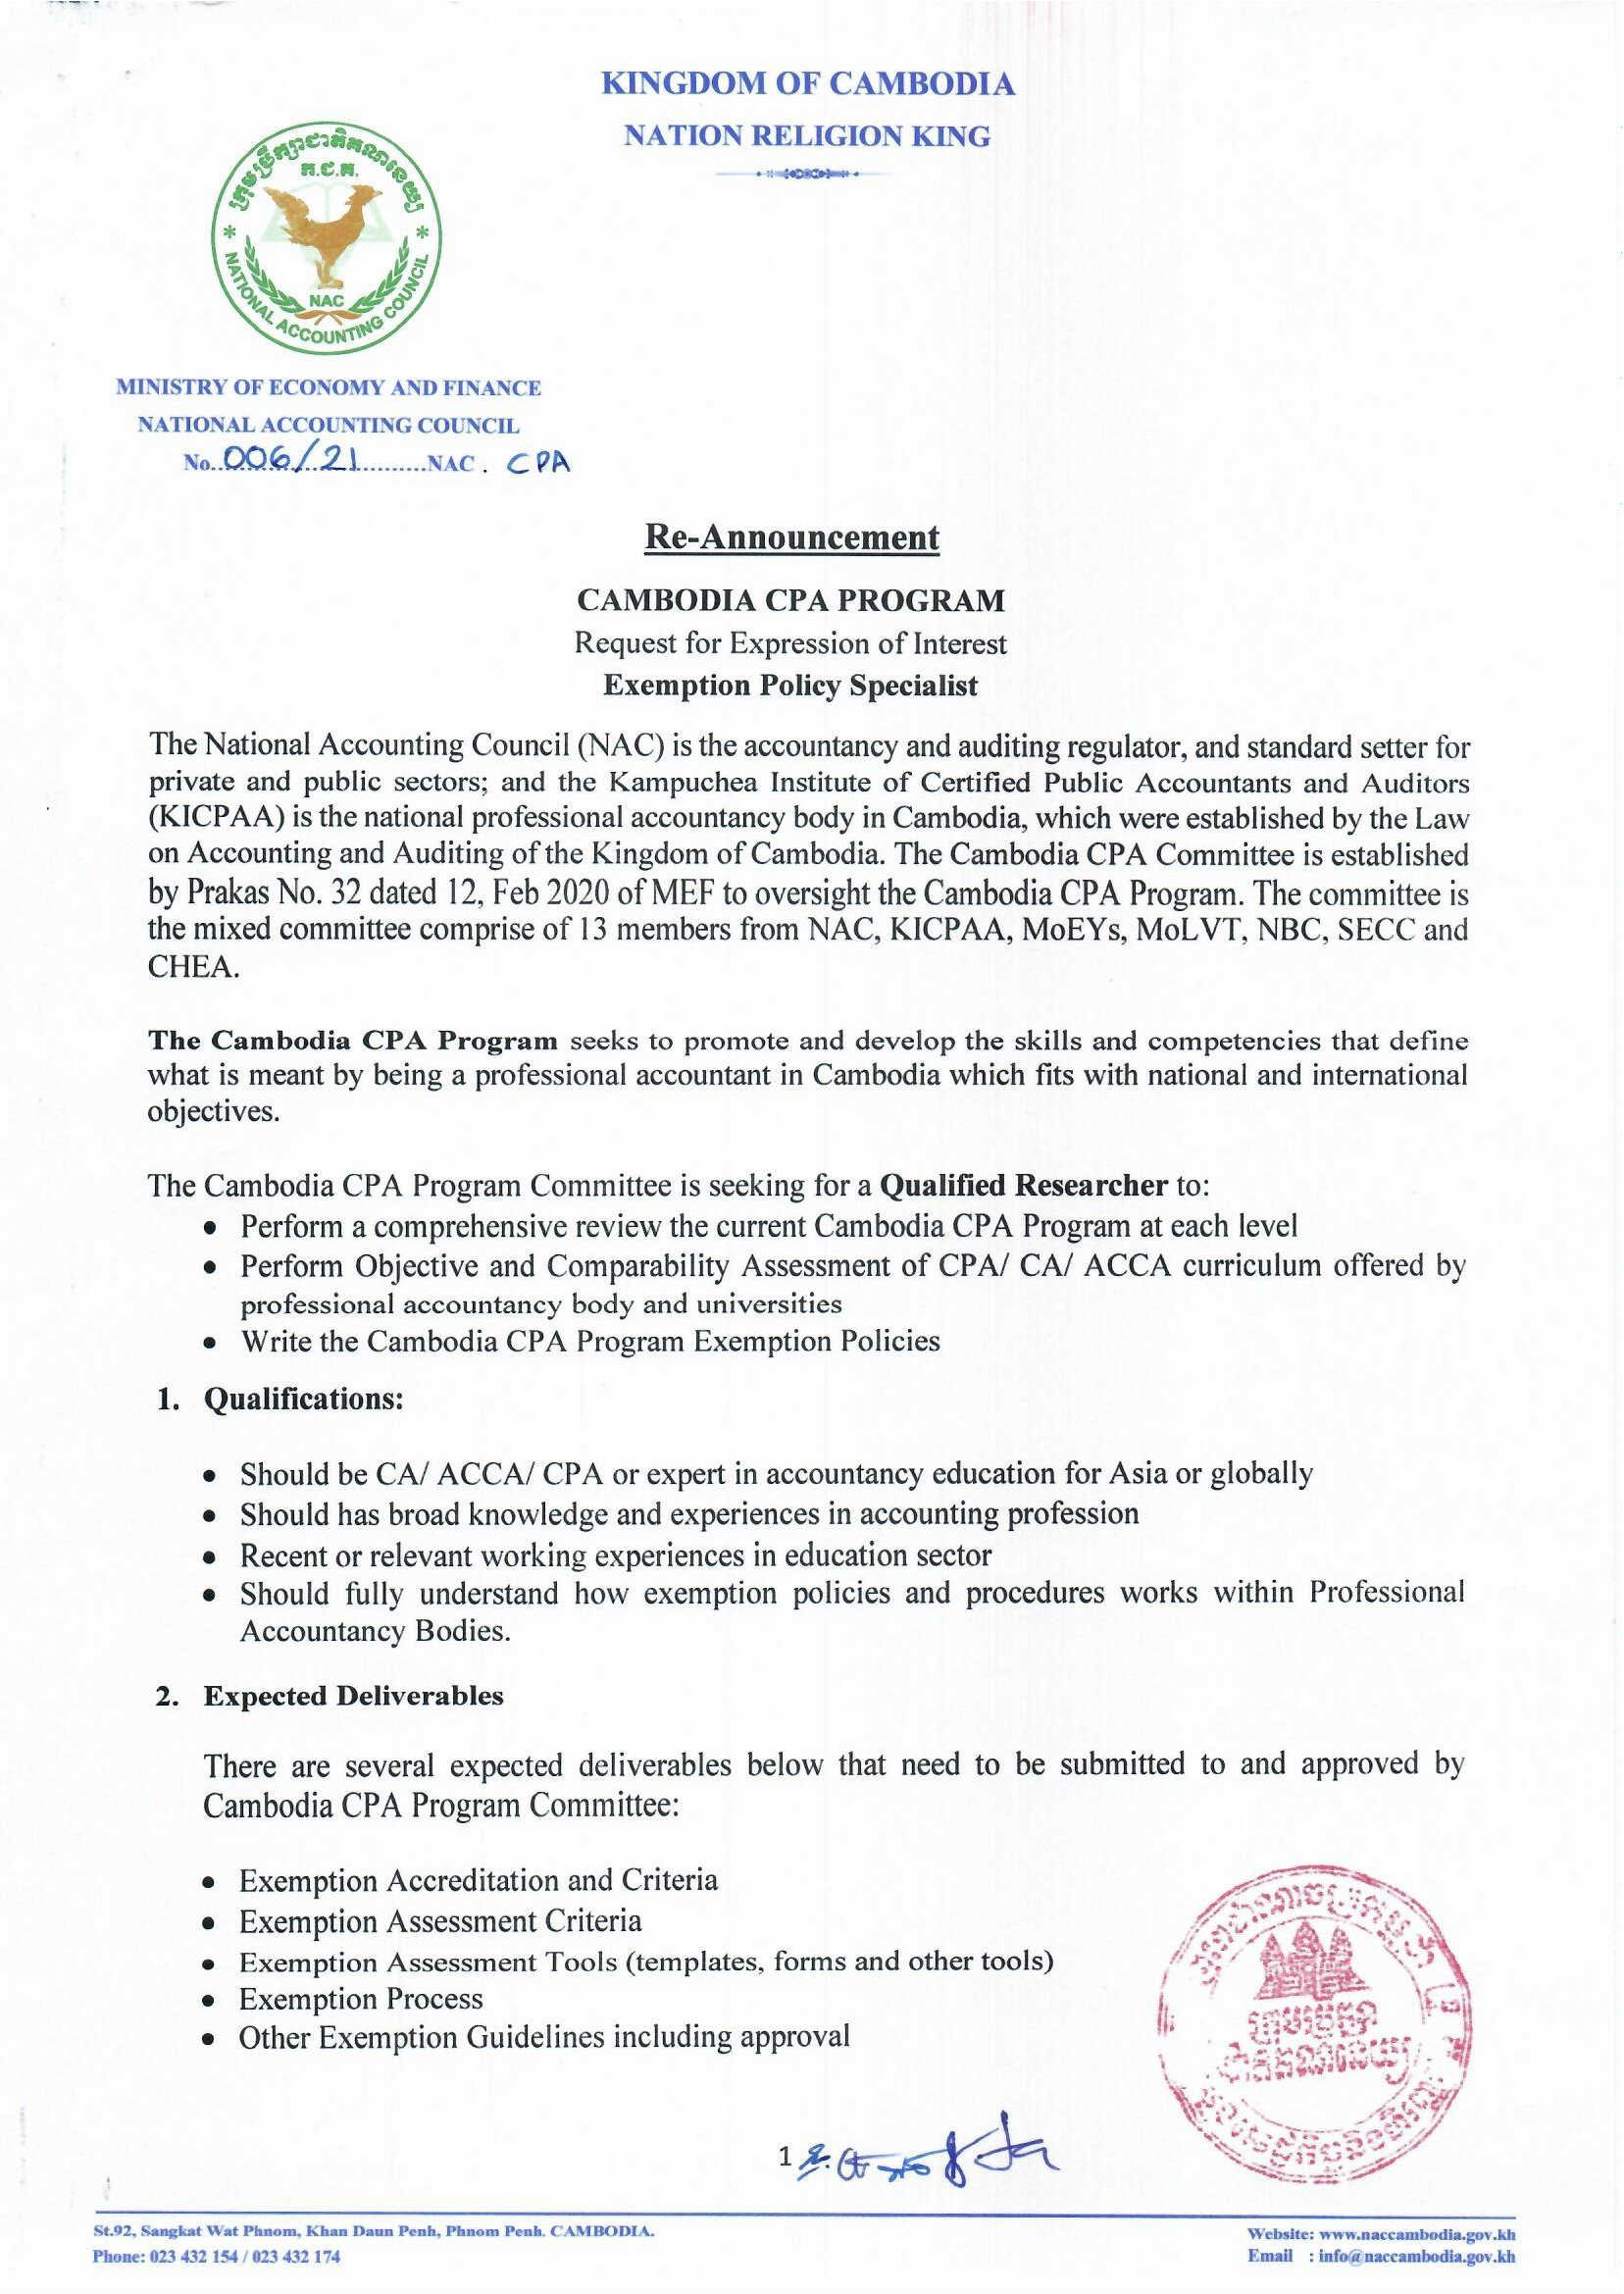 Re-Announcement Exemption Policy Specialist for Cambodia CPA Program